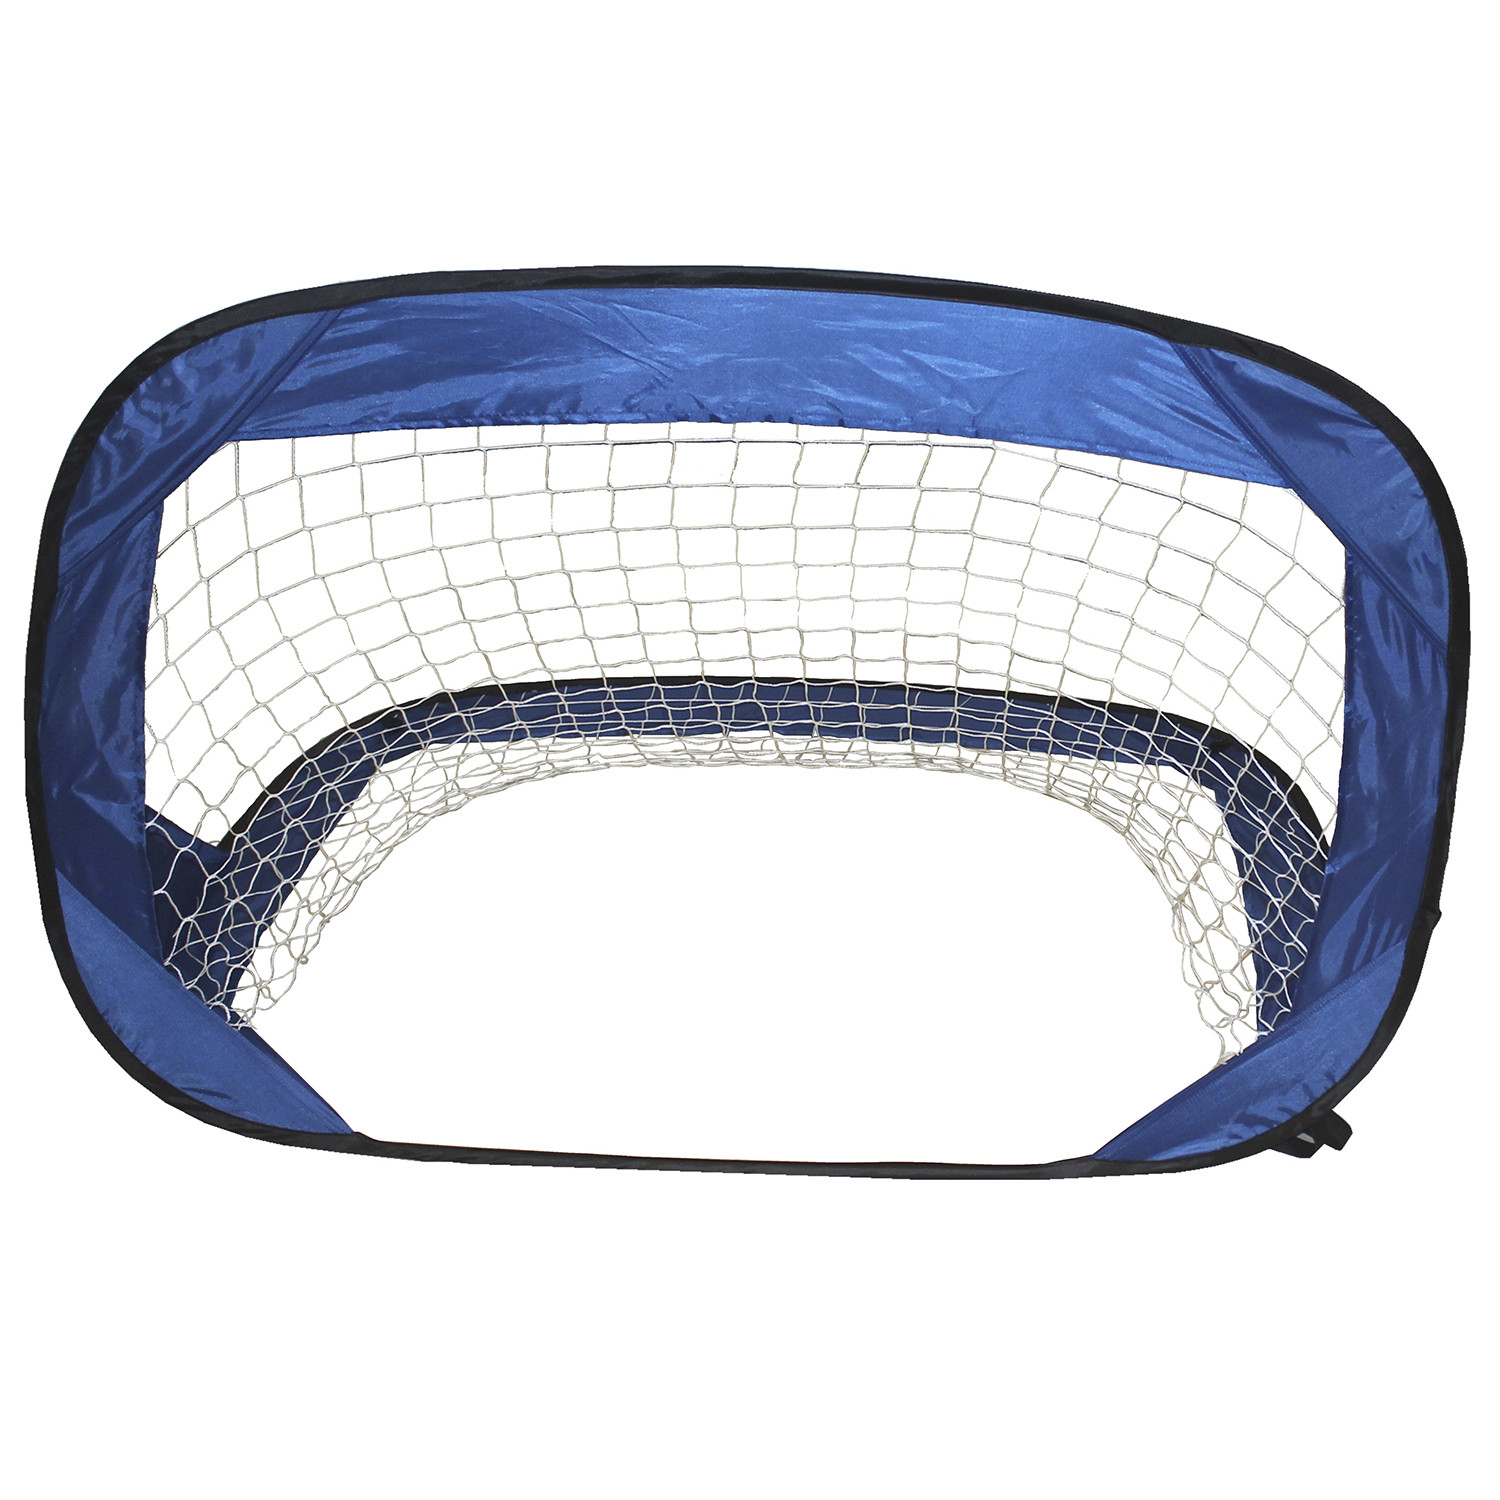 Pop Up Mesh and Steel Football Goal 120 x 80cm Image 1